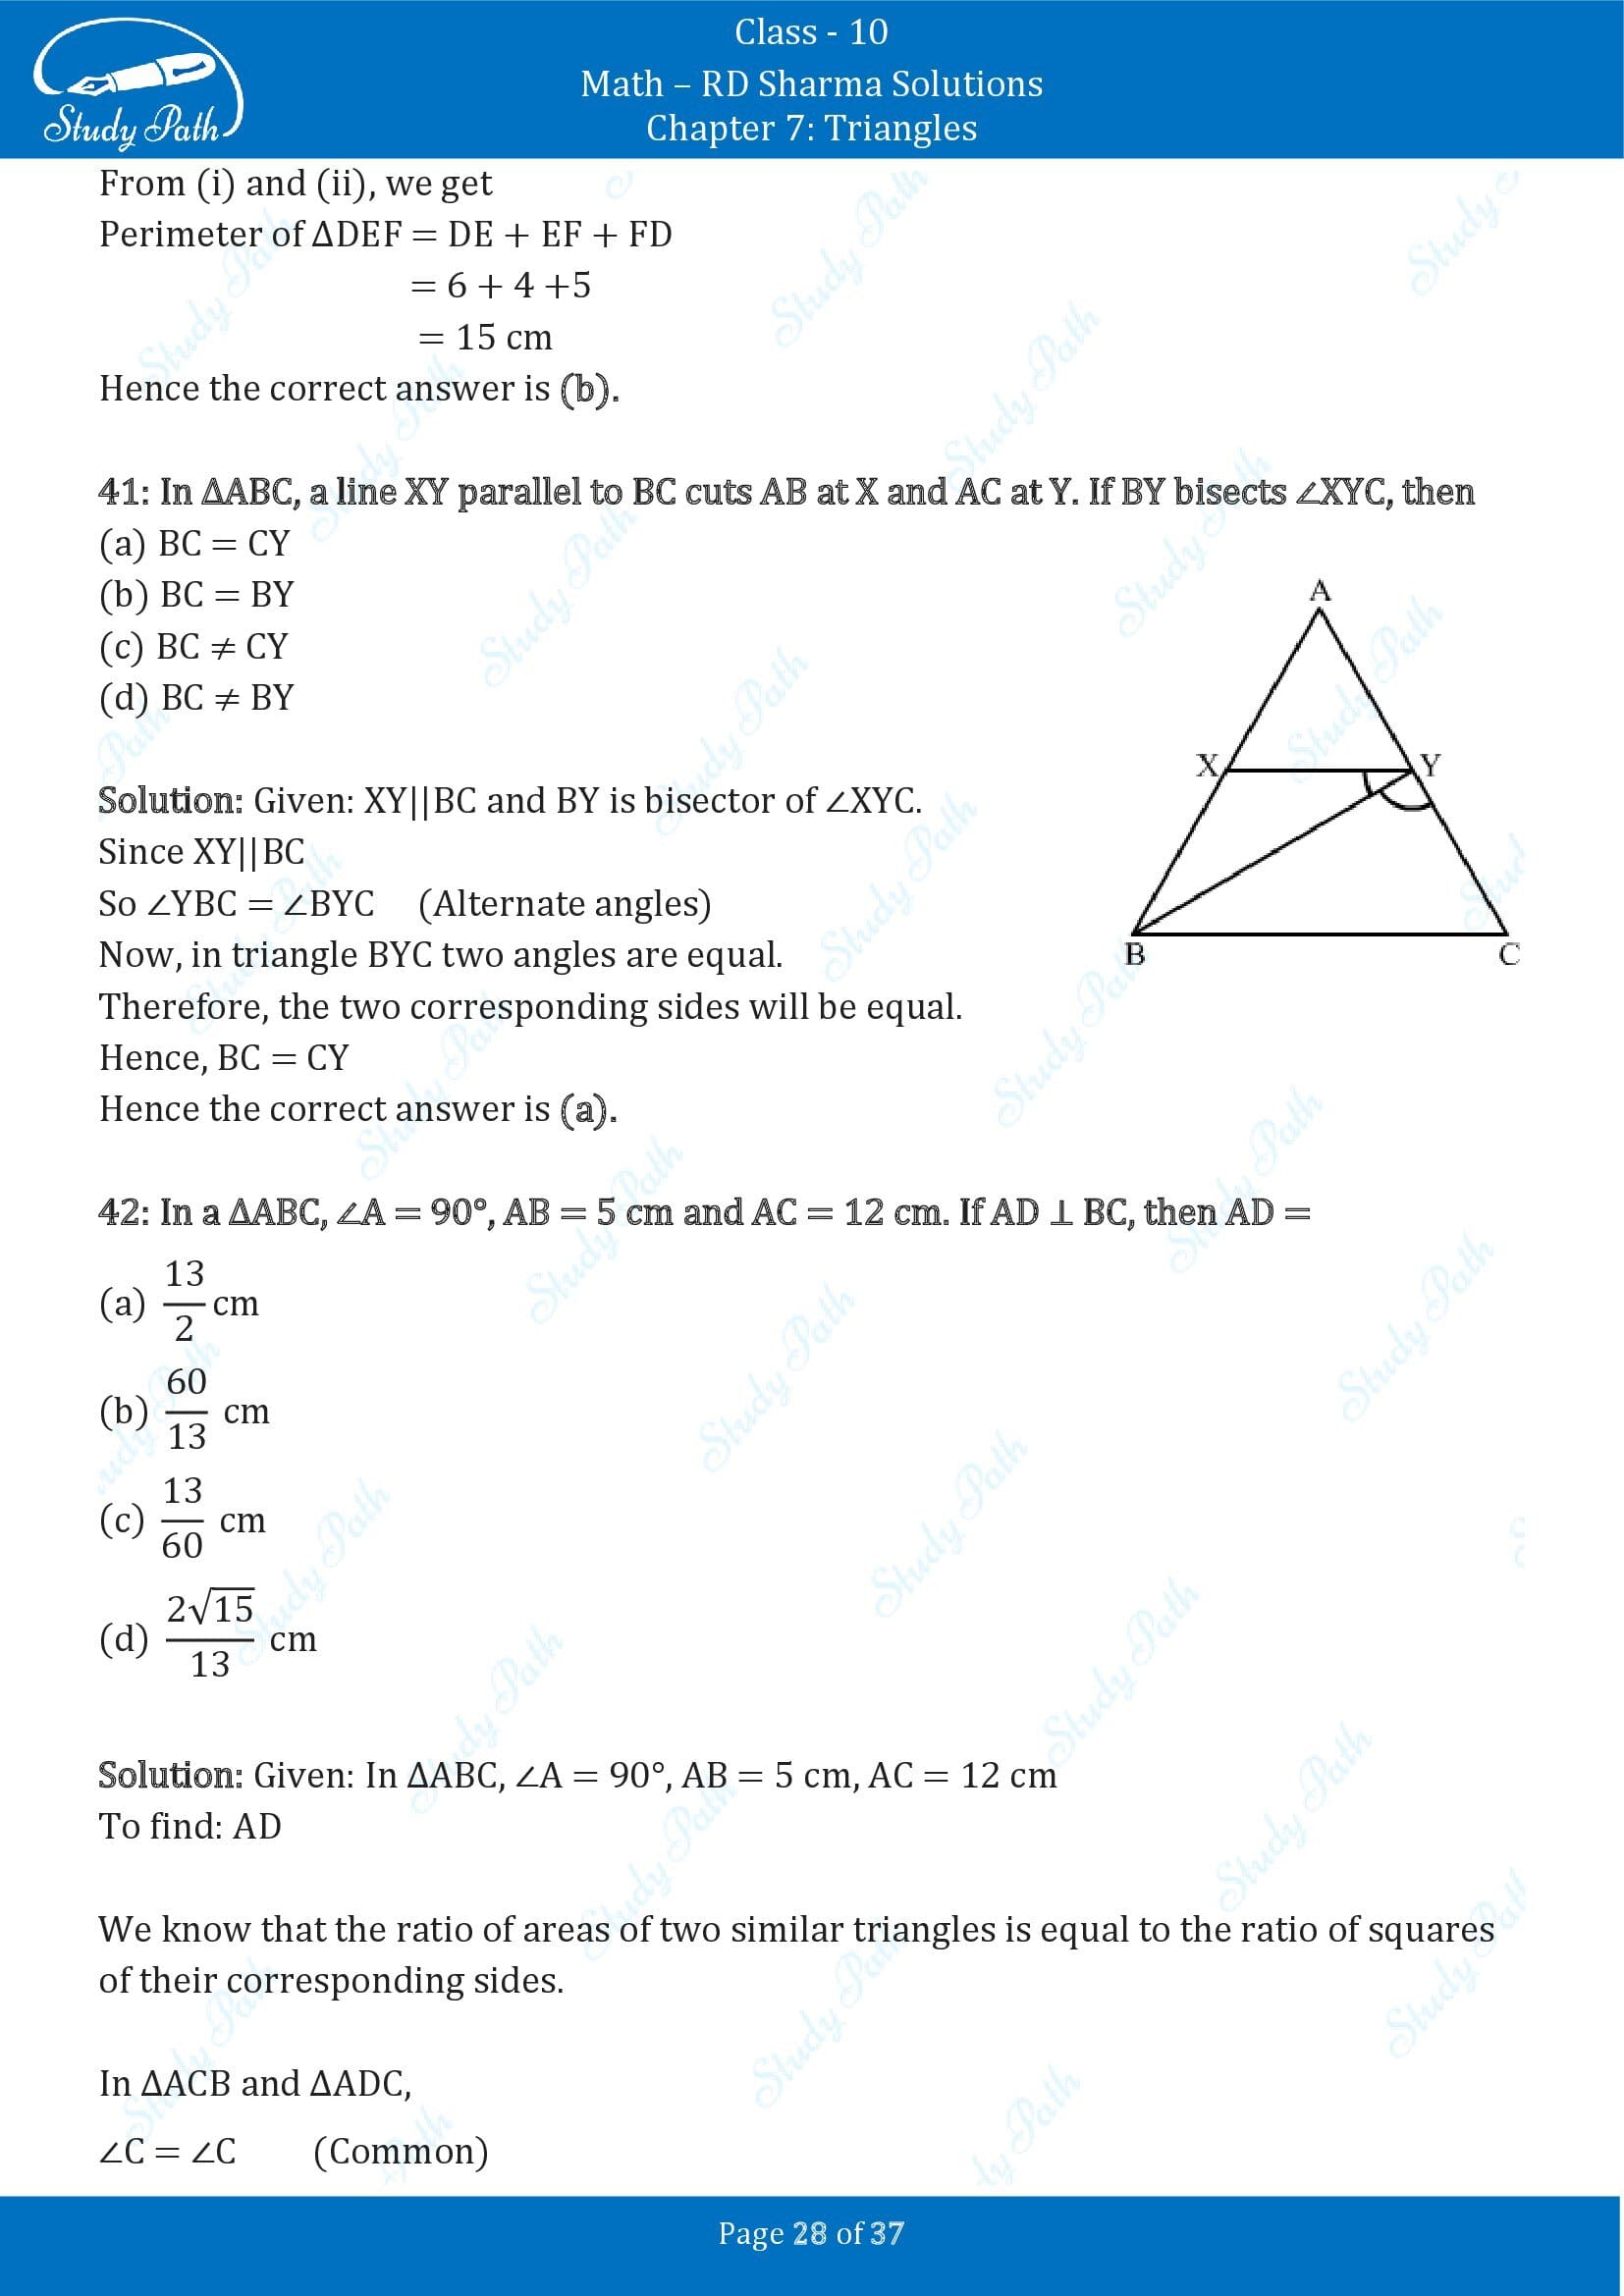 RD Sharma Solutions Class 10 Chapter 7 Triangles Multiple Choice Question MCQs 00028